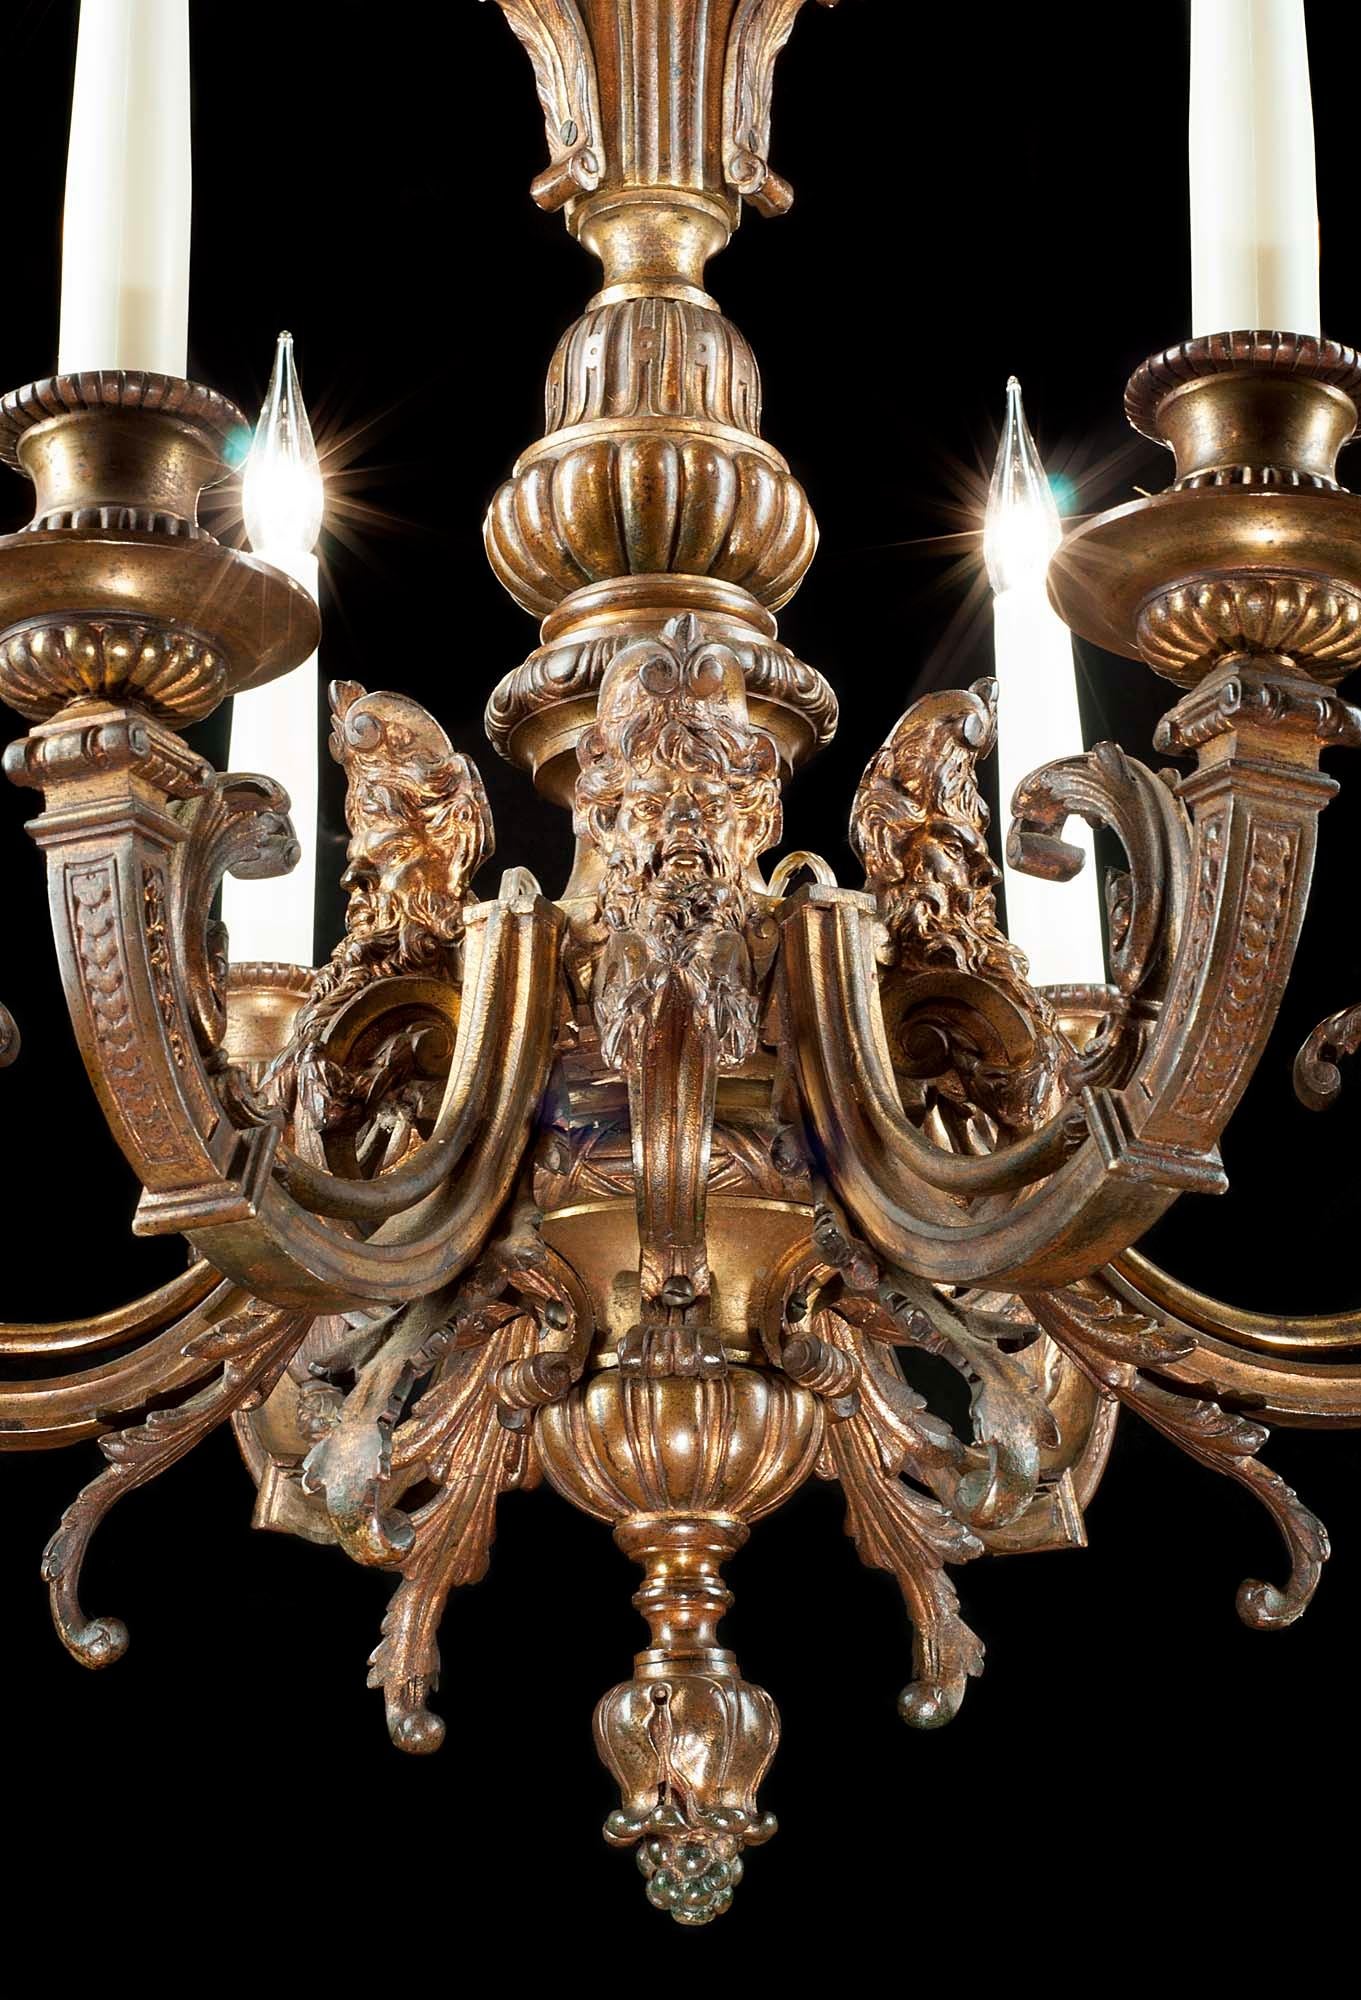 A large and impressive gilt bronze six branch Baroque style chandelier the central baluster stem is topped by a corona above three small caryatid figures and beneathe them interseprsed between the branches are five grotesque masks, the stem